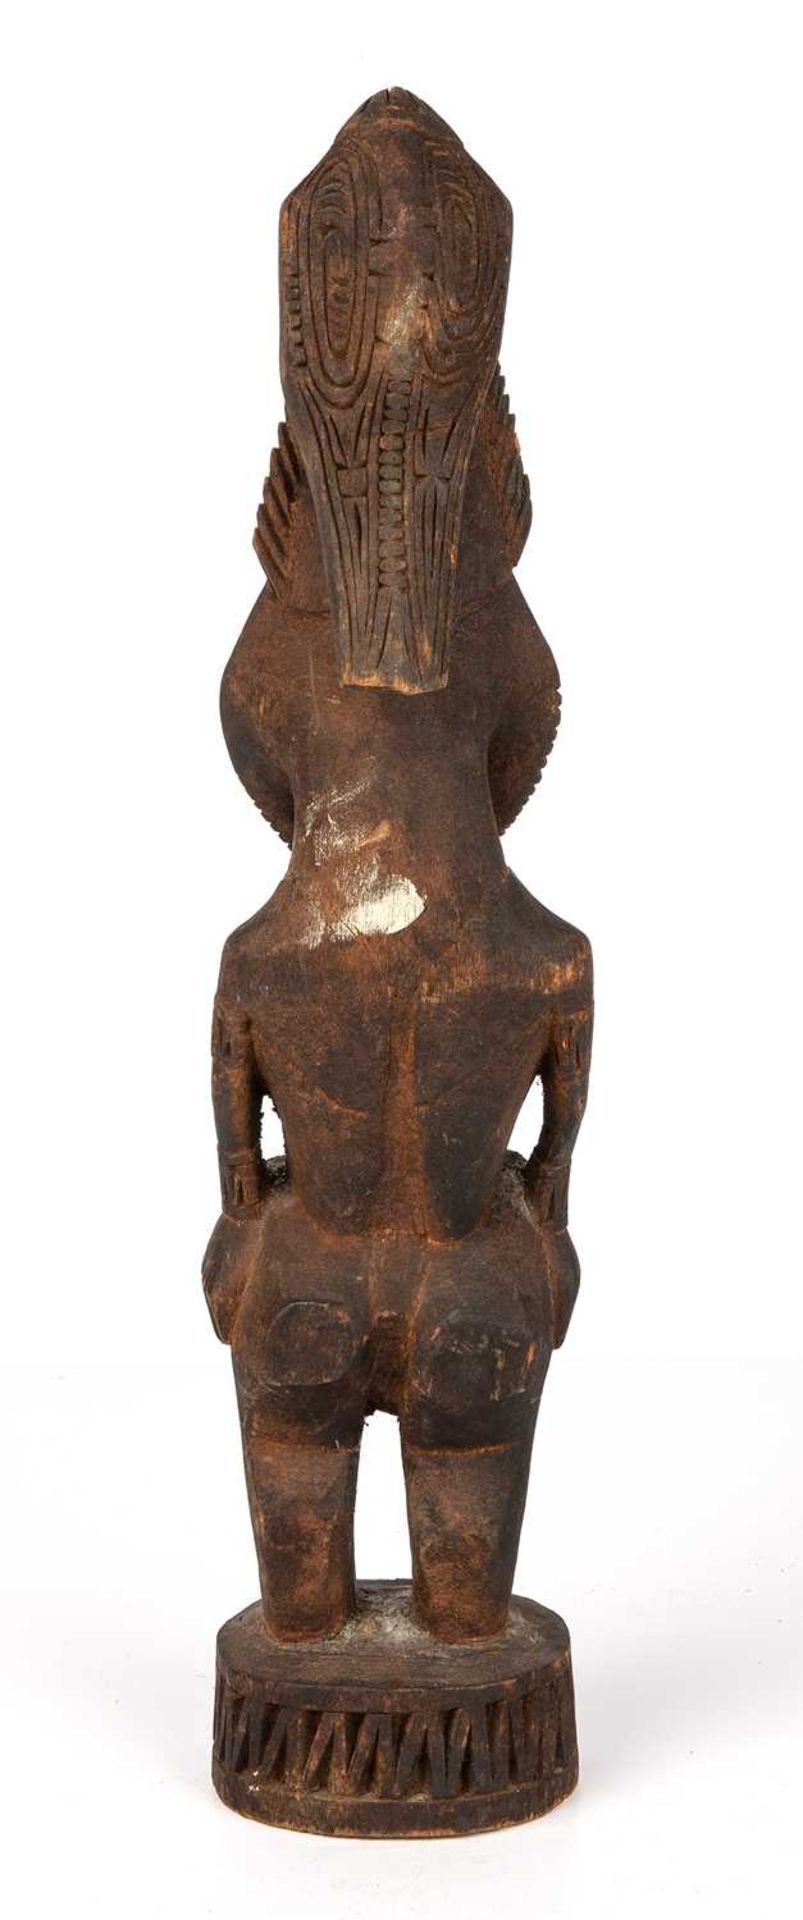 A mid to late 20th century south sea islands carved wooden figure 37cm high. - Image 2 of 3